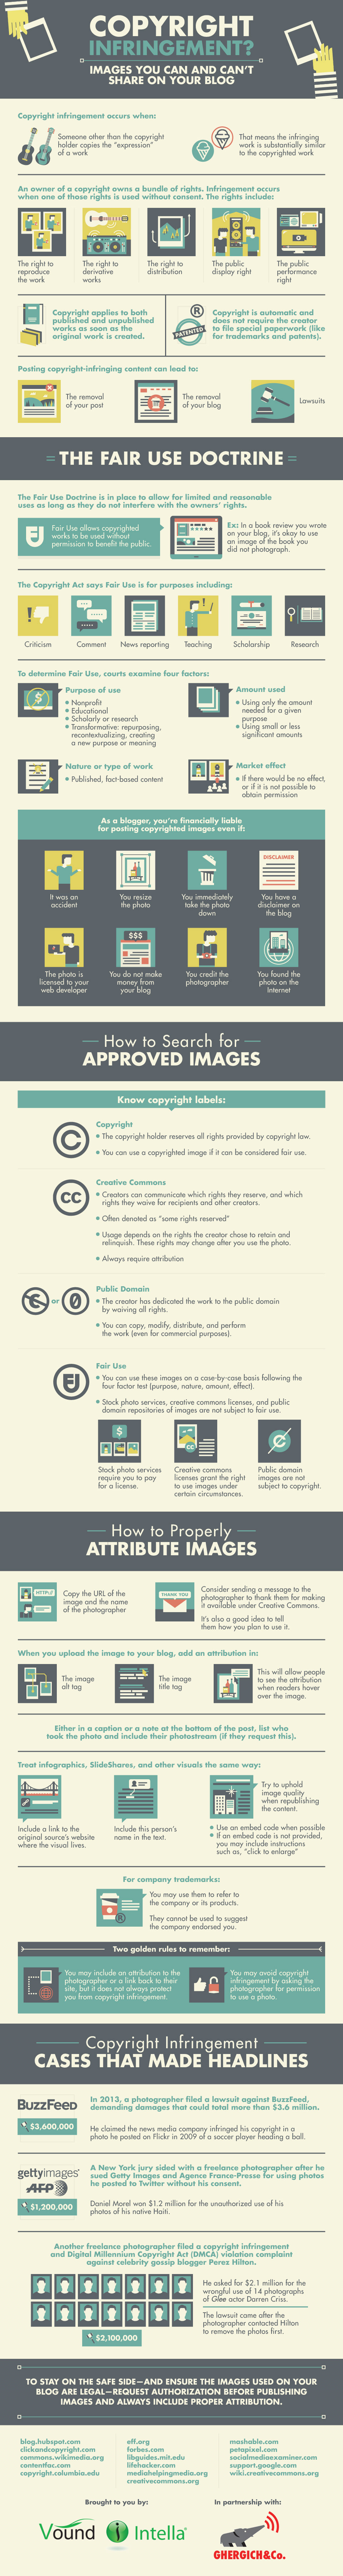 Copyright Infringement: Images You Can and Can't Share on Your Blog info graphic by Vound Software